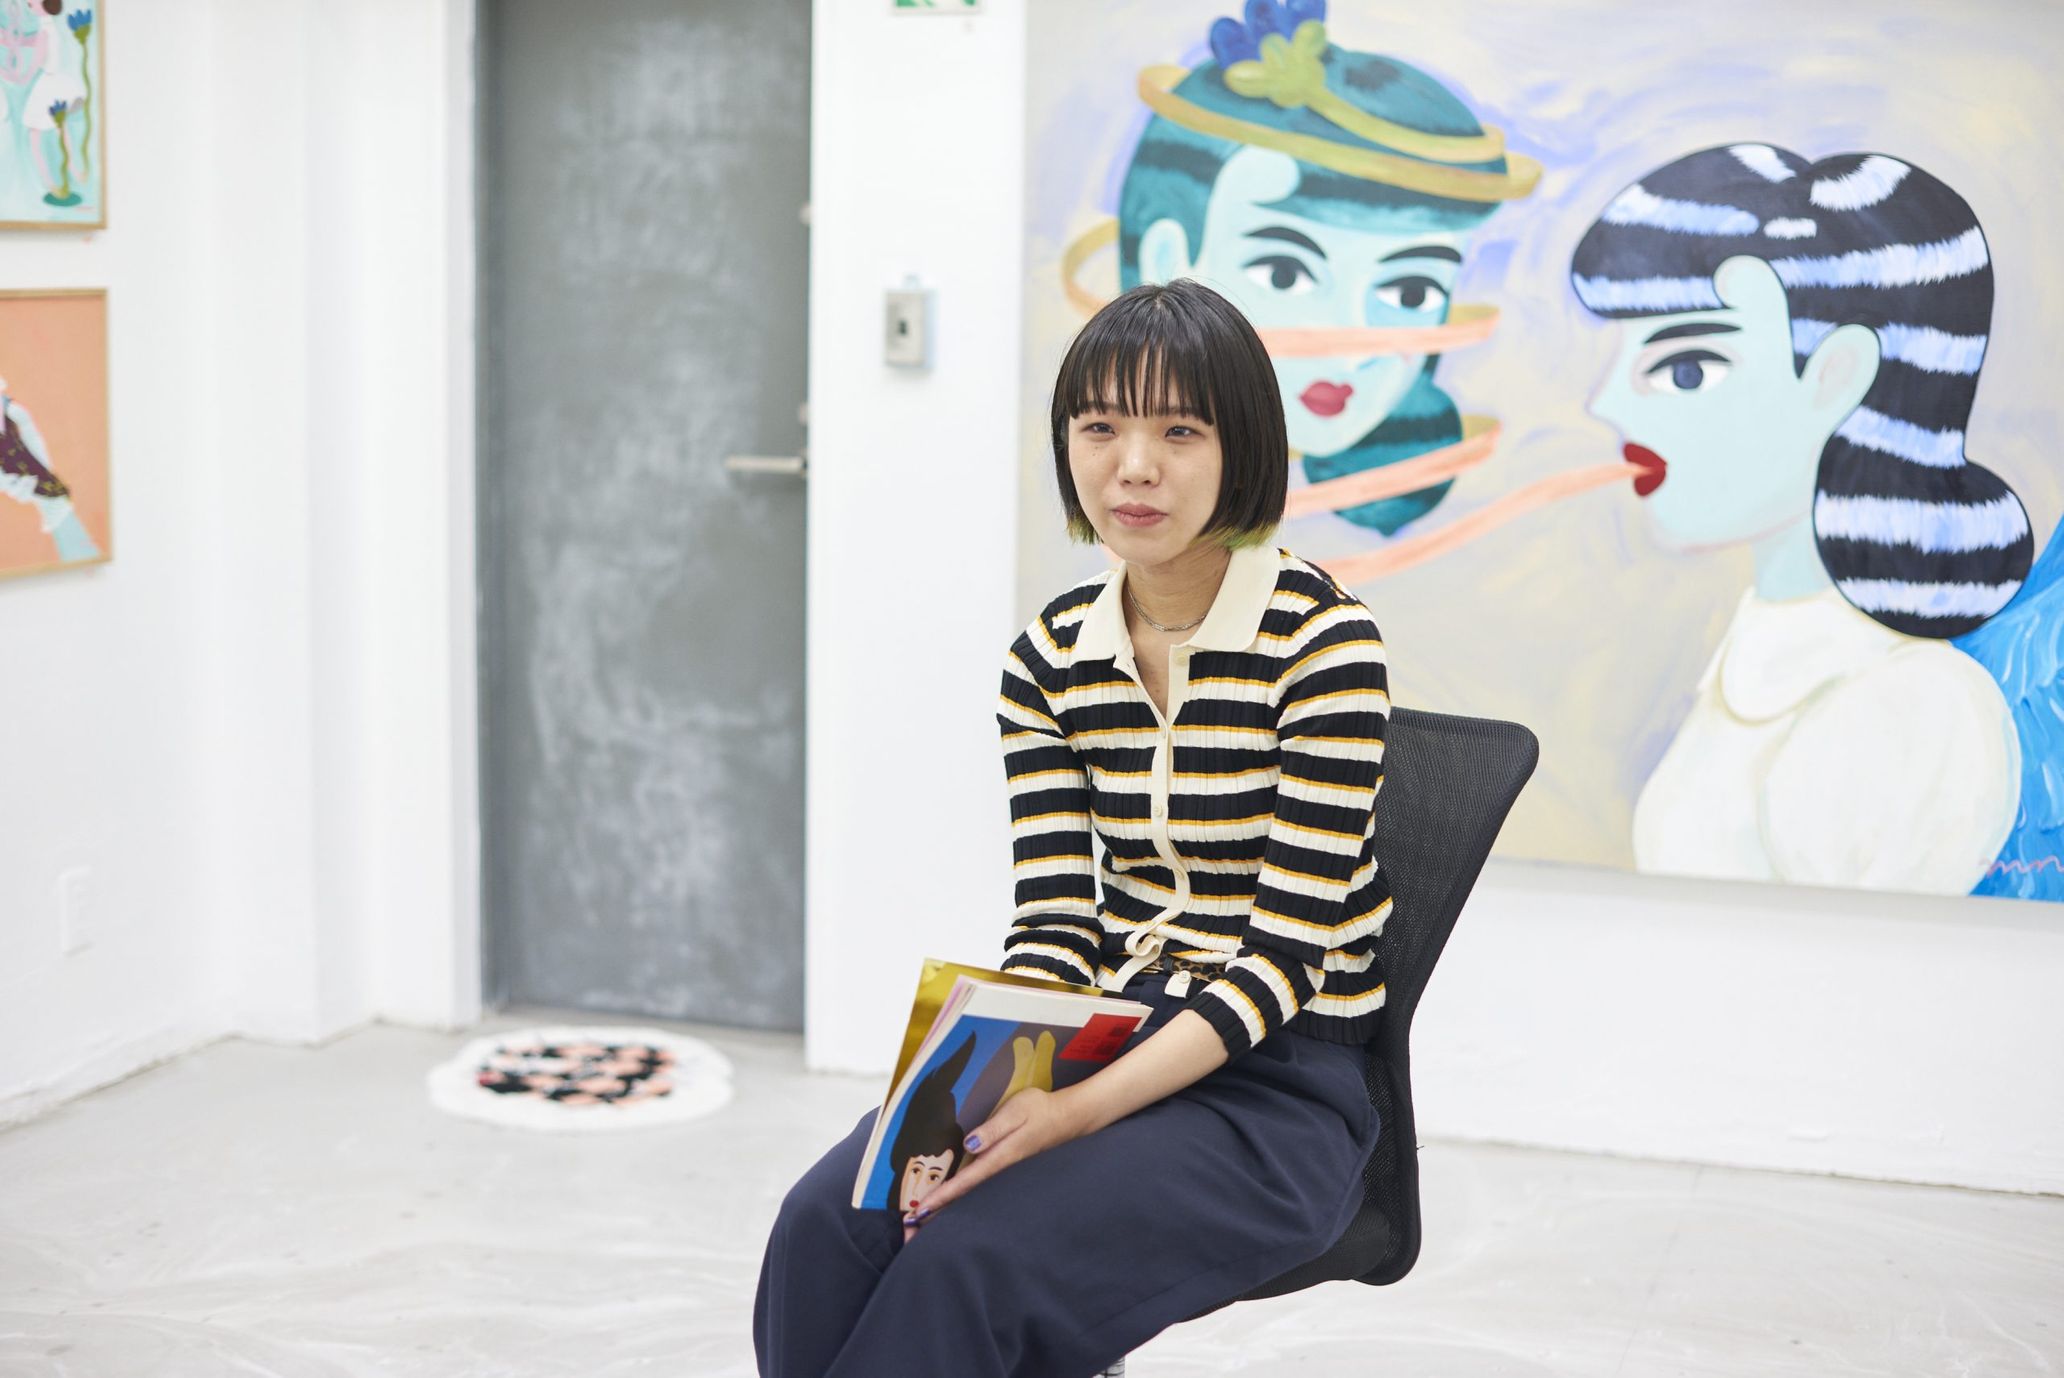 Artist Momoko Nakamura Establishes Her Own Style Through Painting What She Wants to Paint